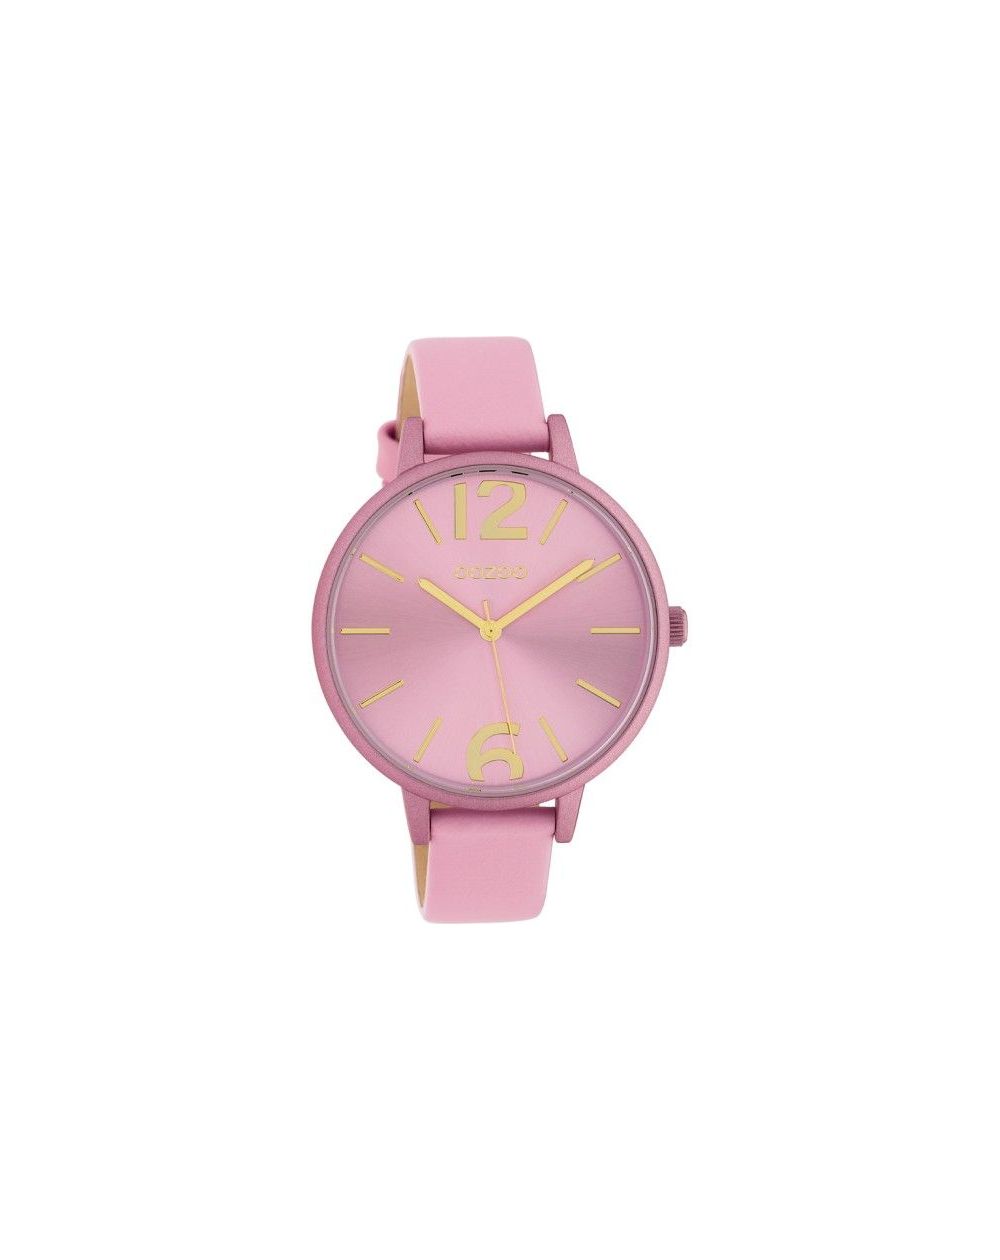 Montre Oozoo Timepieces C10441 soft pink - Marque montre Oozoo